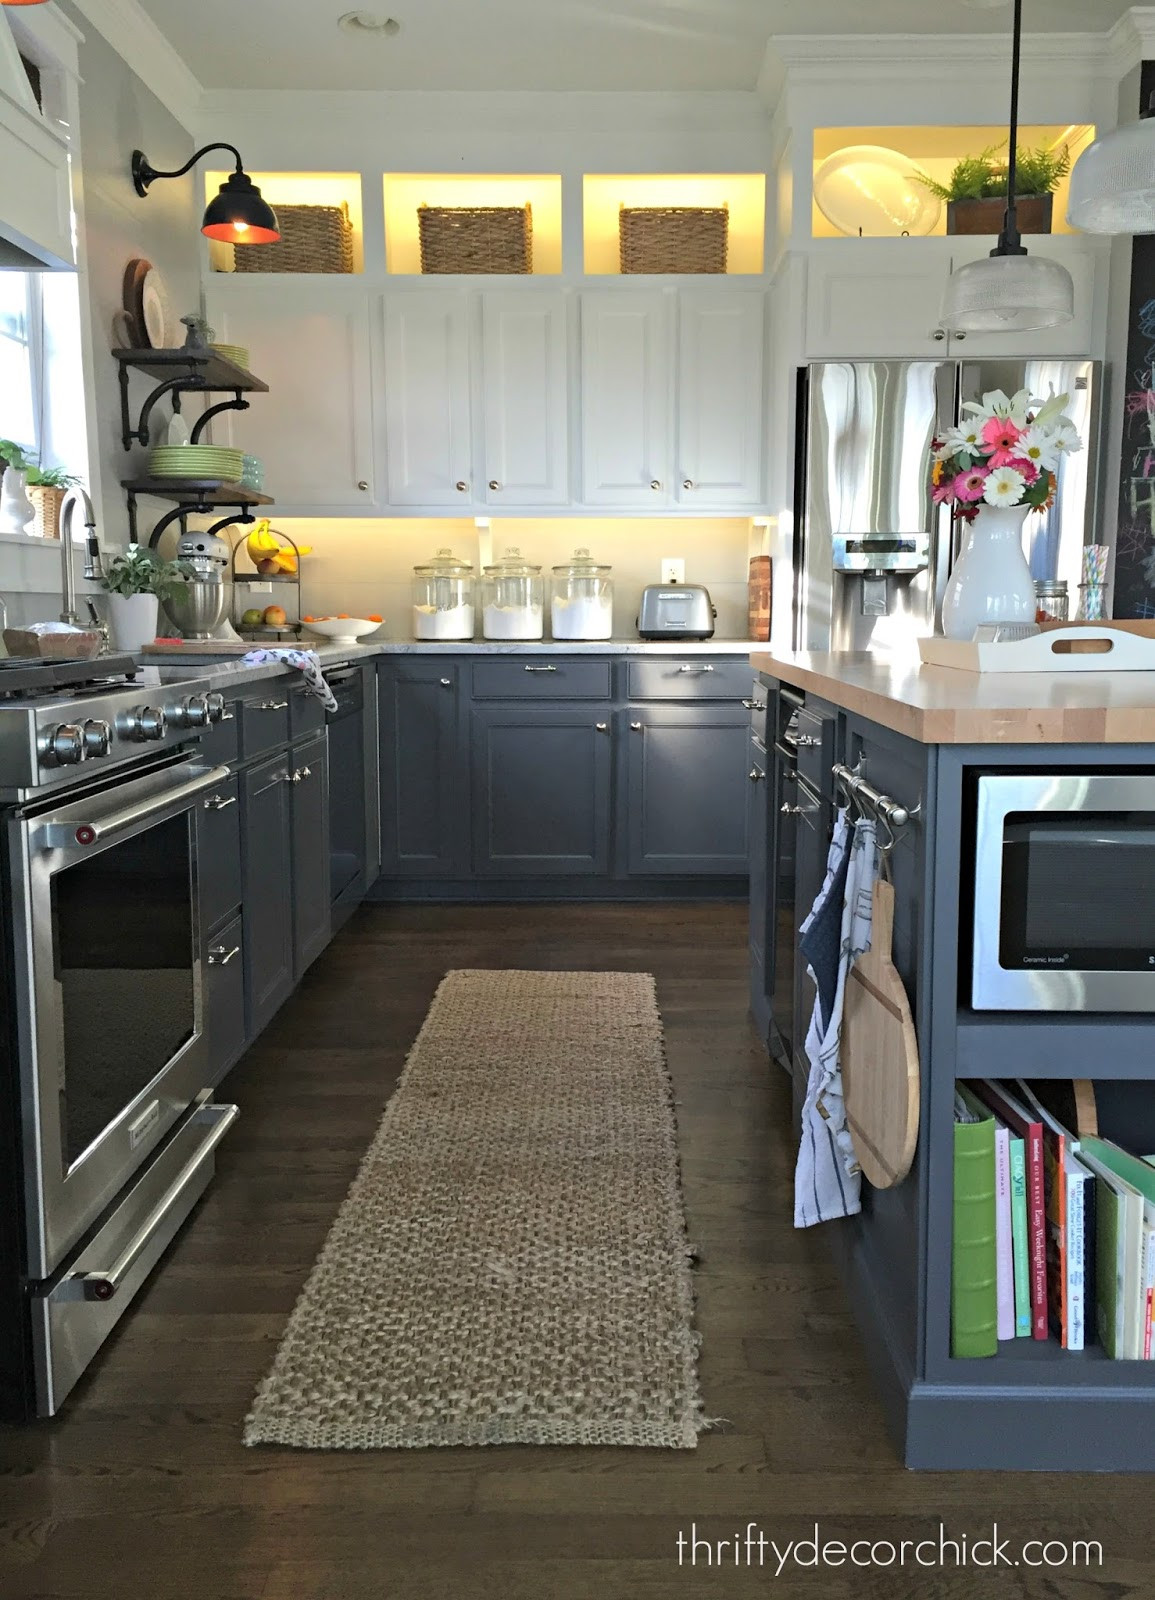 Kitchen Accent Lighting
 DIY Upper and Lower Cabinet Lighting from Thrifty Decor Chick